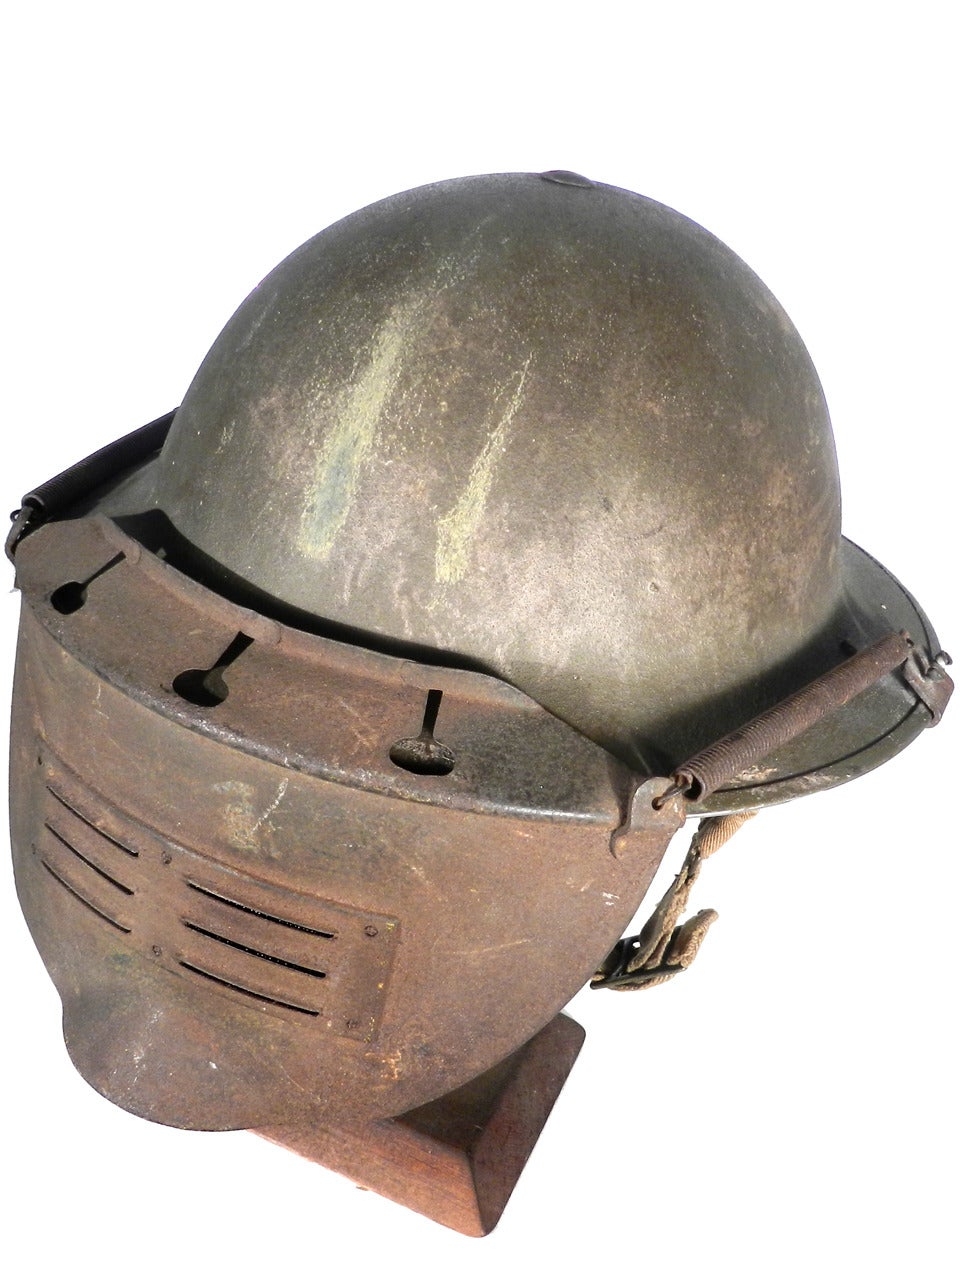 A superb and very rare WW2 British Army special duties helmet with visor face mask. It is in complete condition with original period factory (lightly textured) army green paint. The paint on the helmet is in good aged condition. The stamping on the